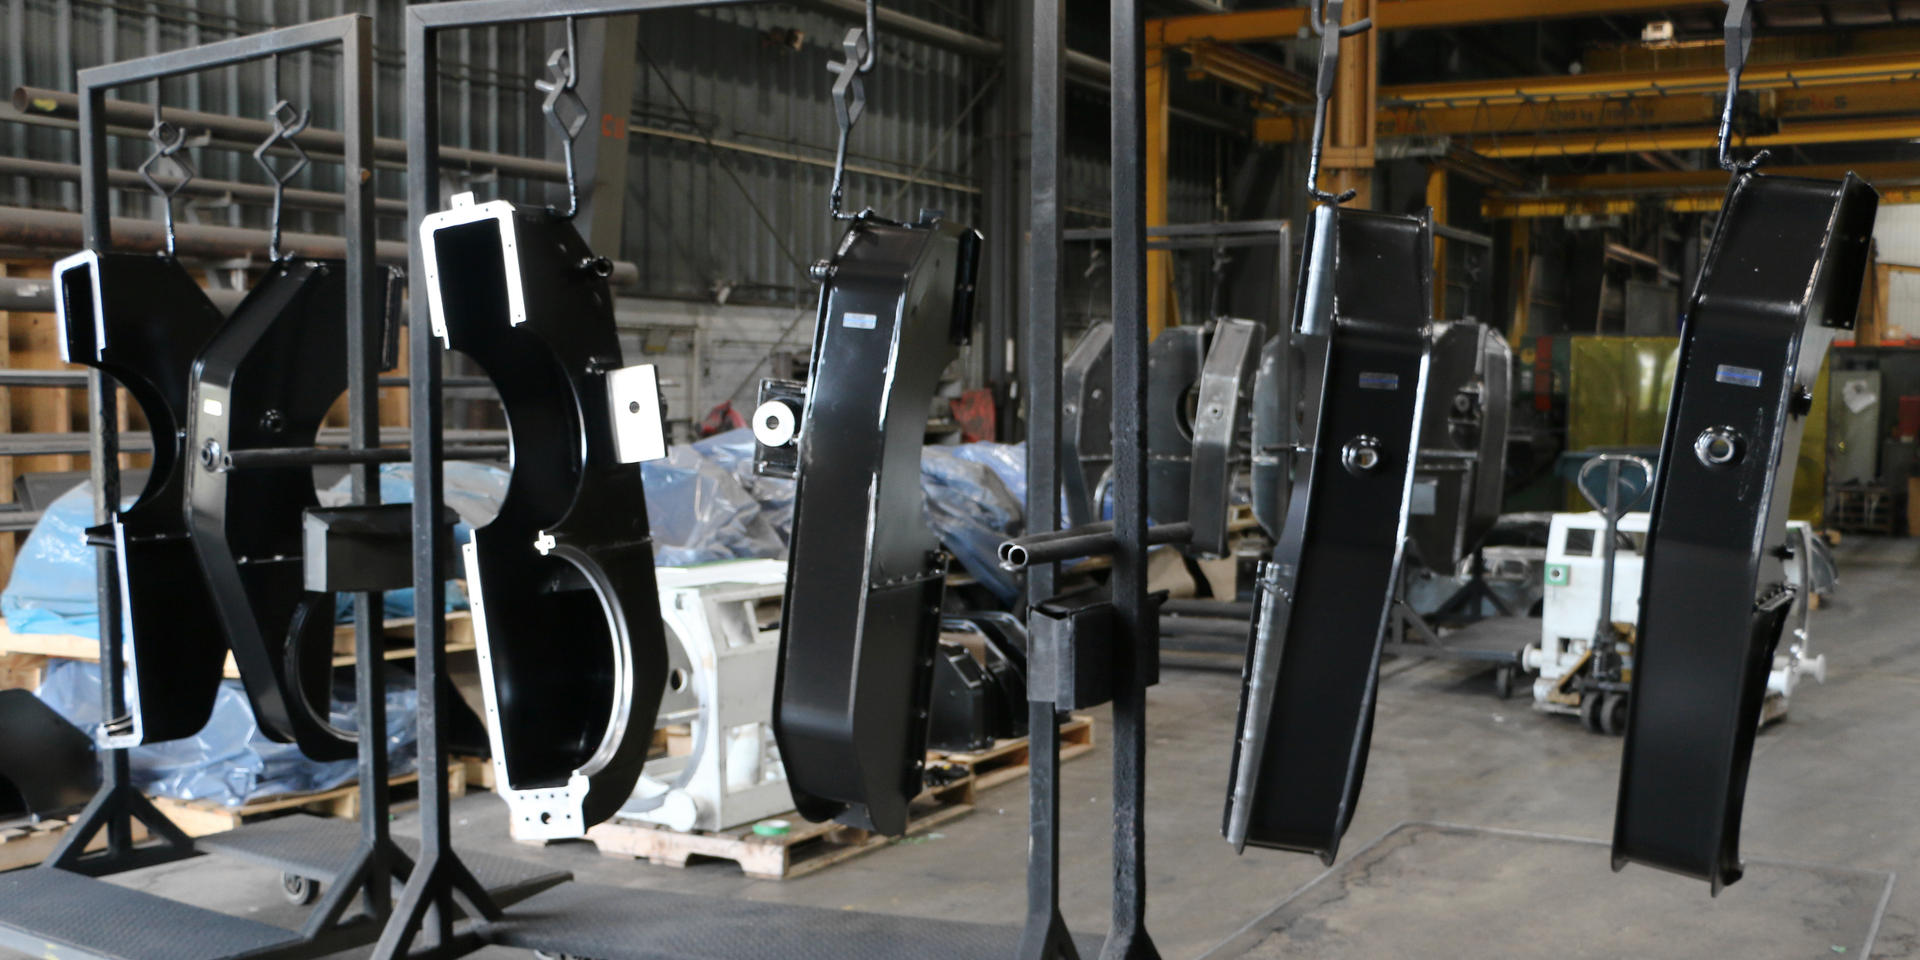 Painted gear cases hanging for drying in paint booth area before having final inspection completed at Piper Lane location. This photo and others in this slideshow demonstrate ADJ Industries' painting capabilities.